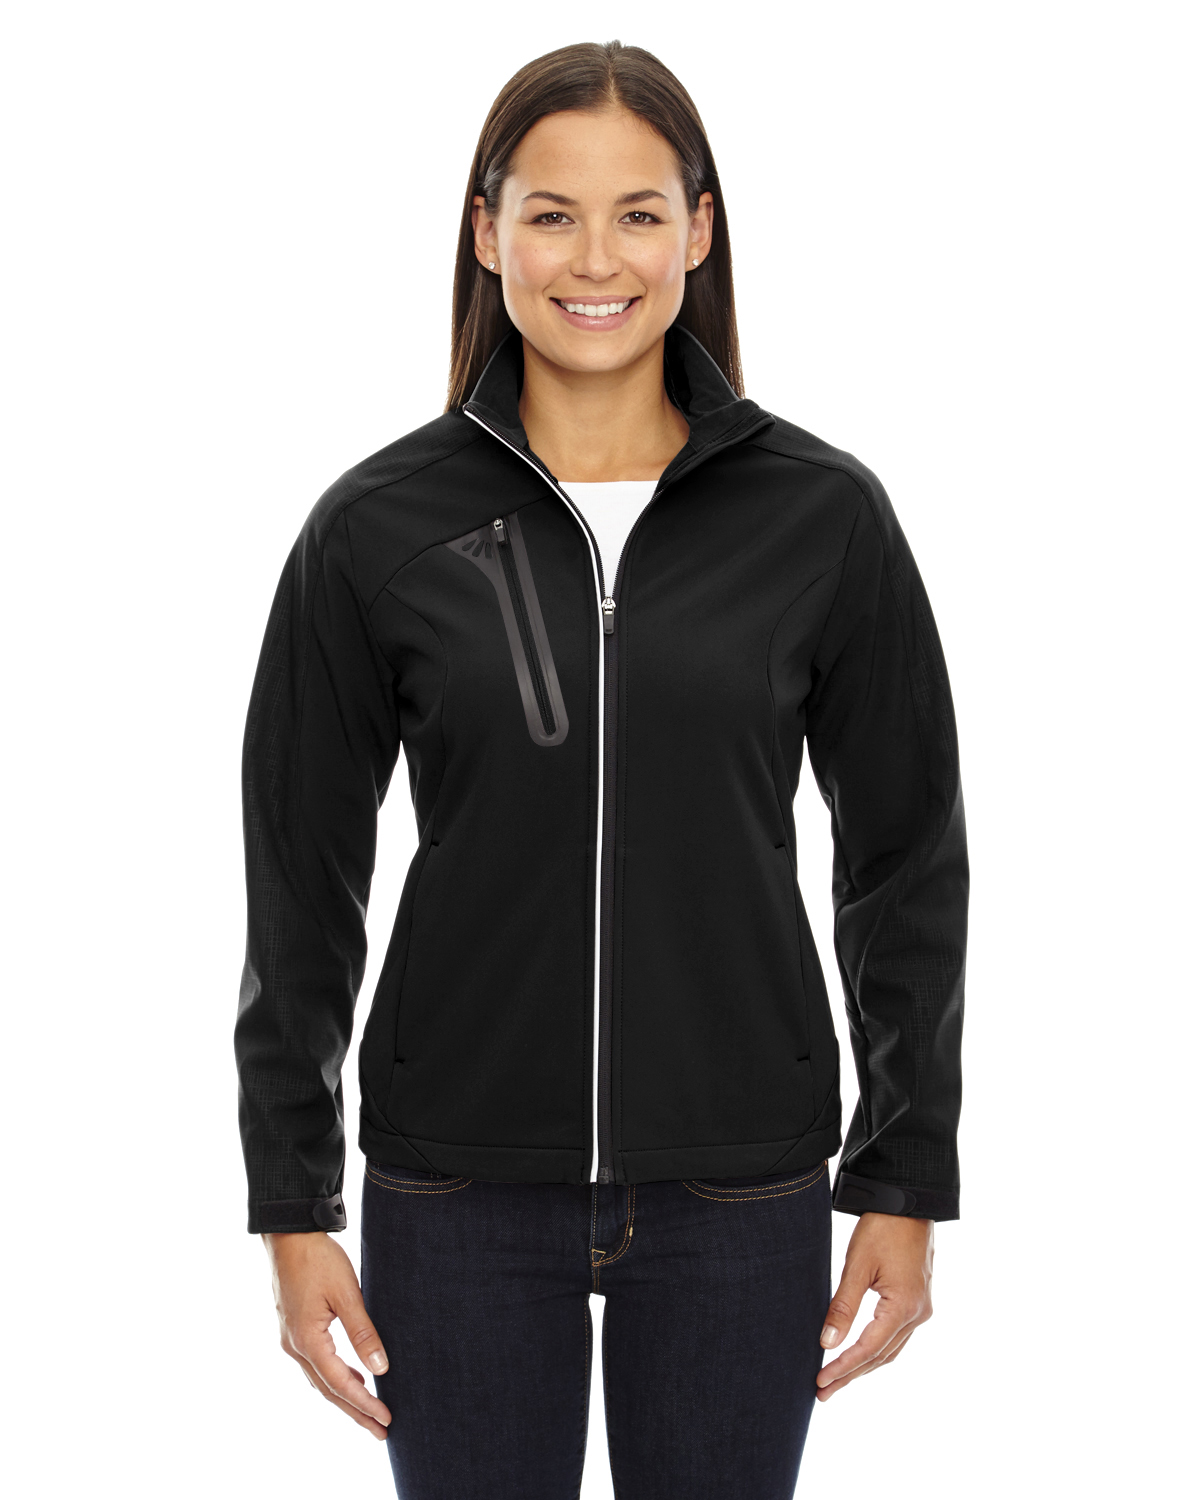 The Ash City - North End Ladies' Terrain Colorblock Soft Shell with Embossed Print - BLACK 703 - XS - image 1 of 1